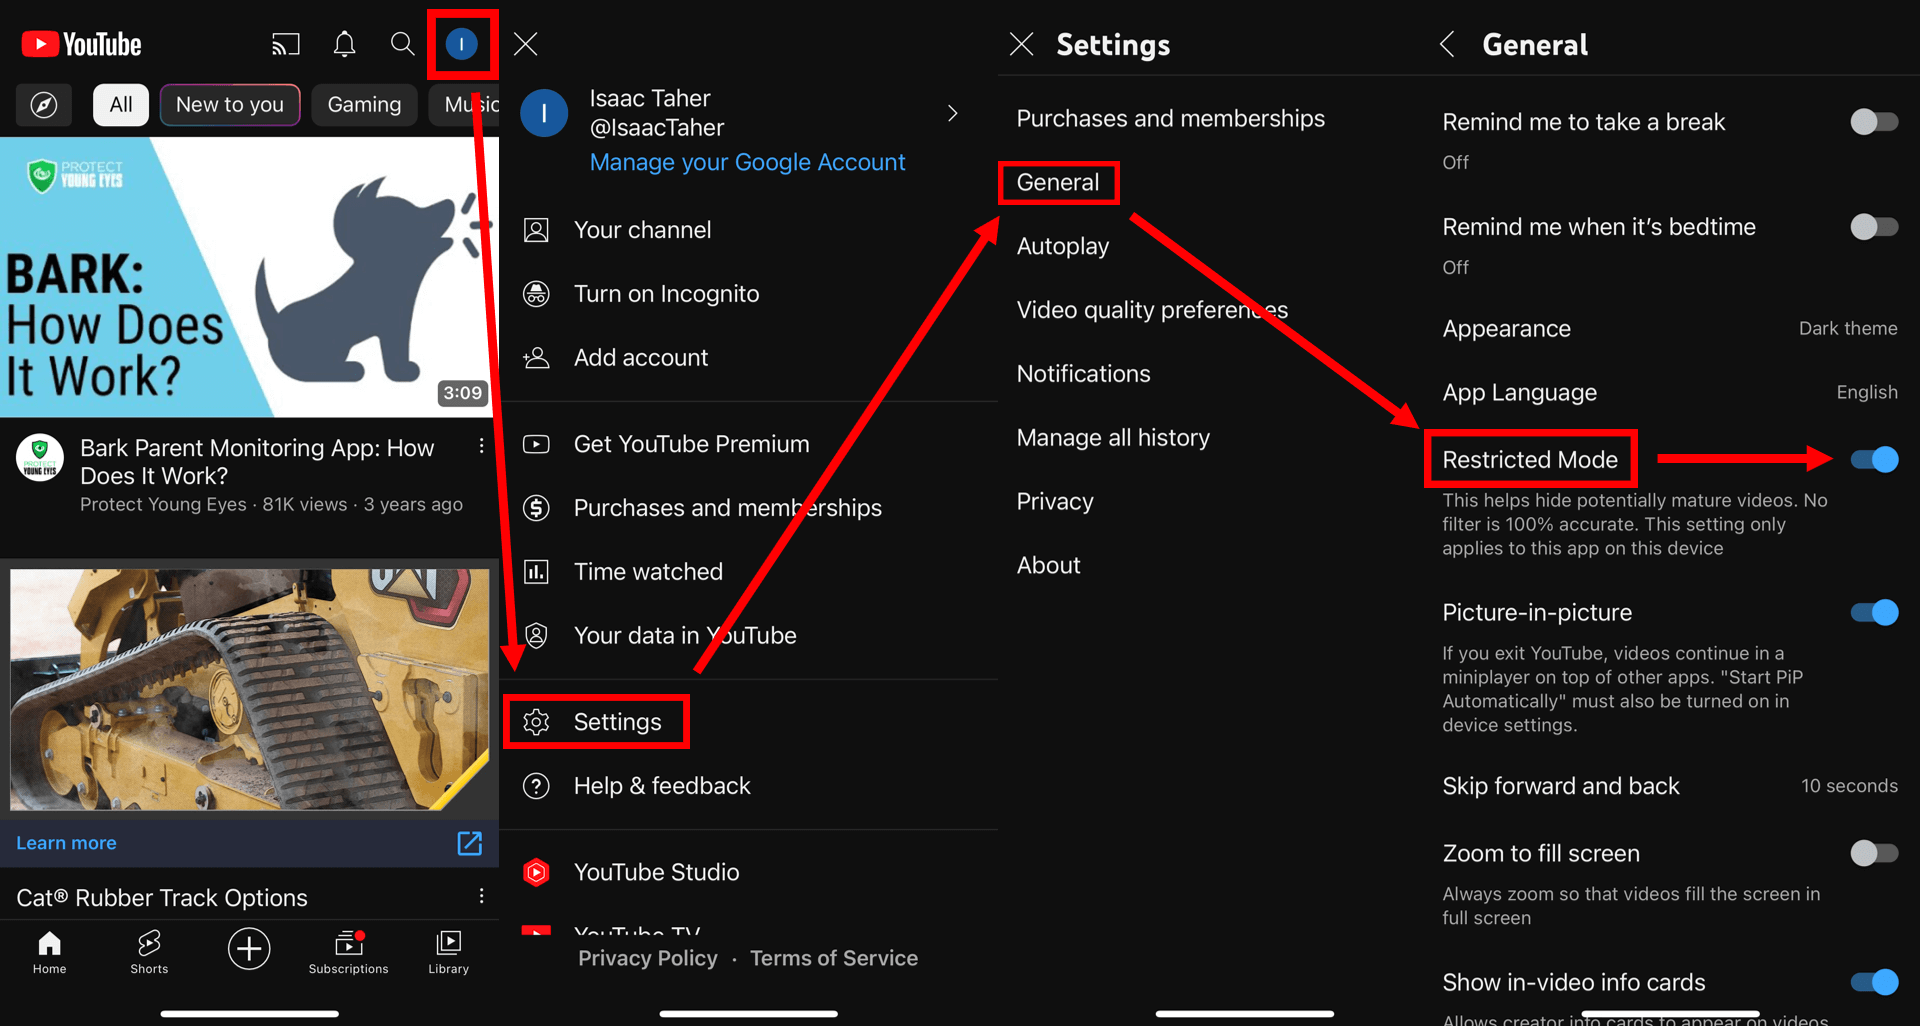 Screenshots showing how to set up Restricted Mode. YouTube Parental Controls and Set-up for Every Device